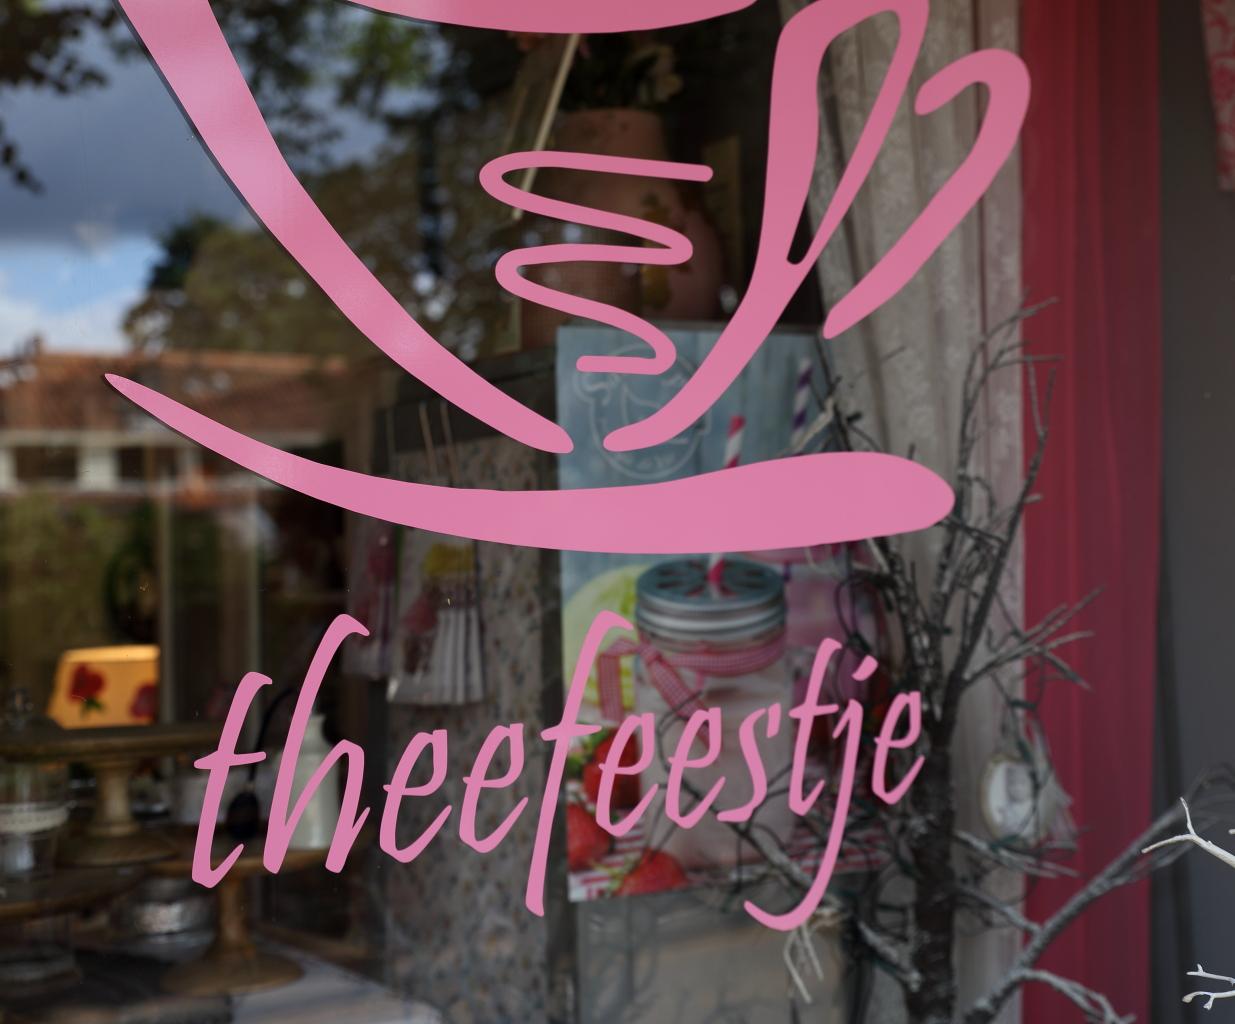 Photo Theefeestje in Amersfoort, Shopping, Gift, Hobby, Delicacy - #1